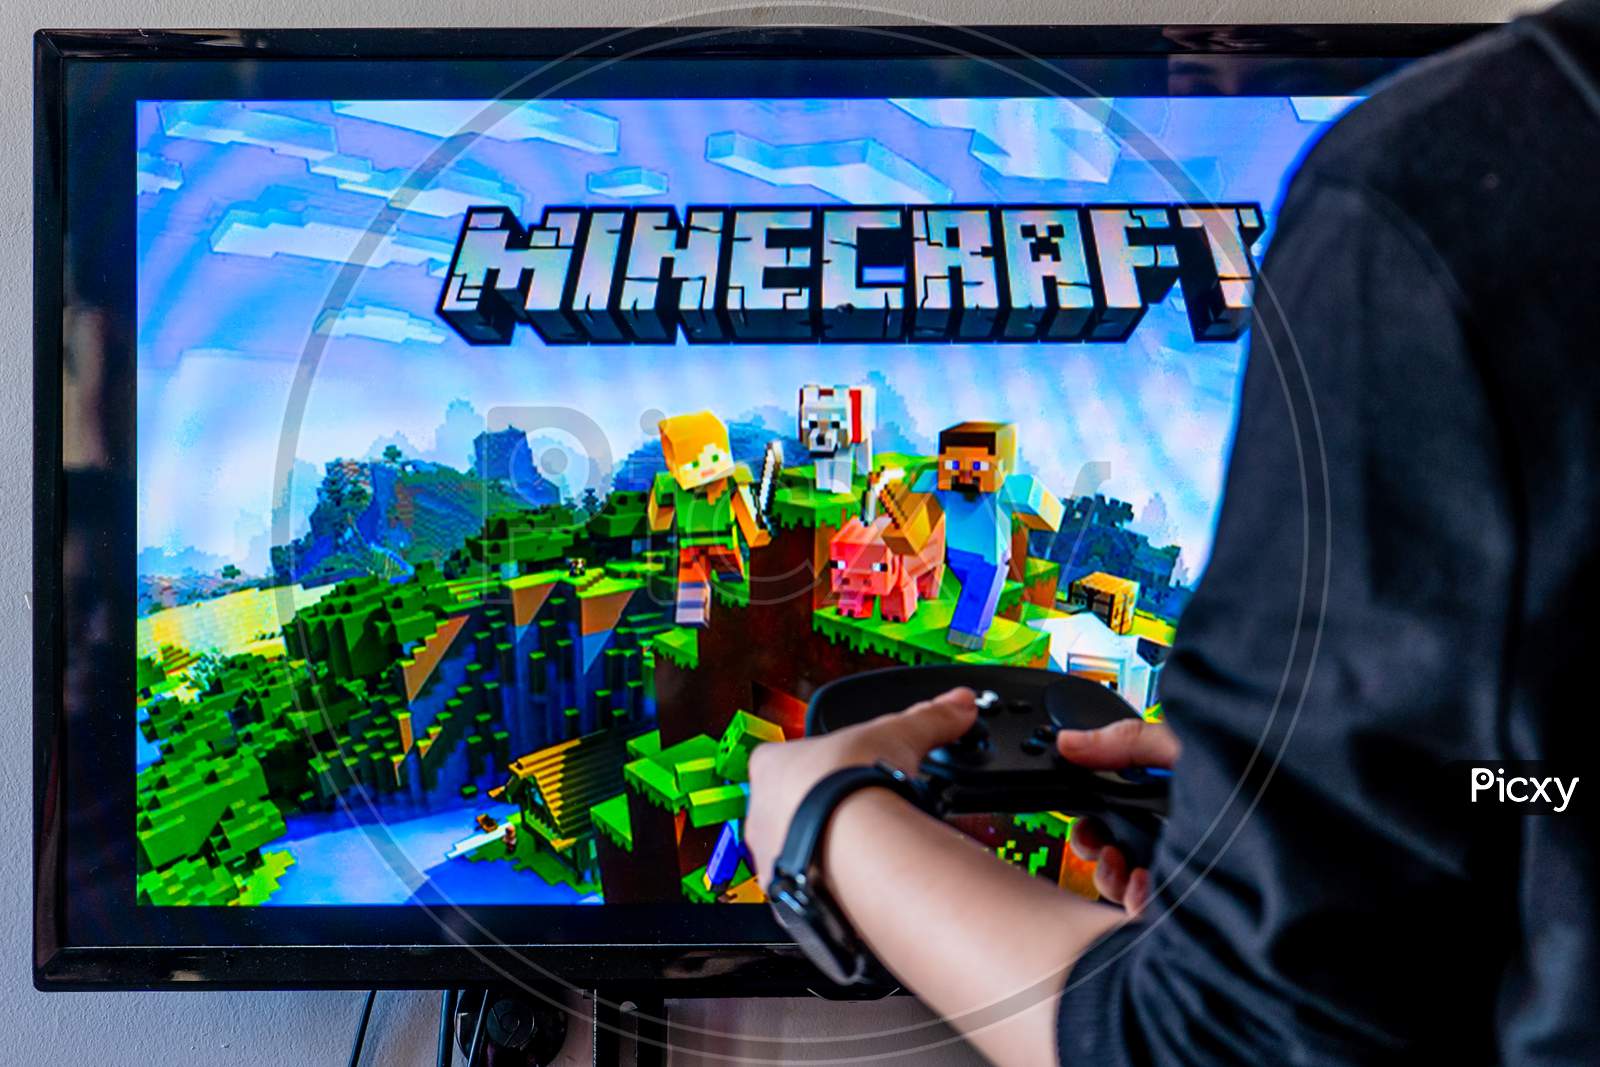 Woman Holding A Steam Controller And Playing Popular Video Game Minecraft On A Television And Pc